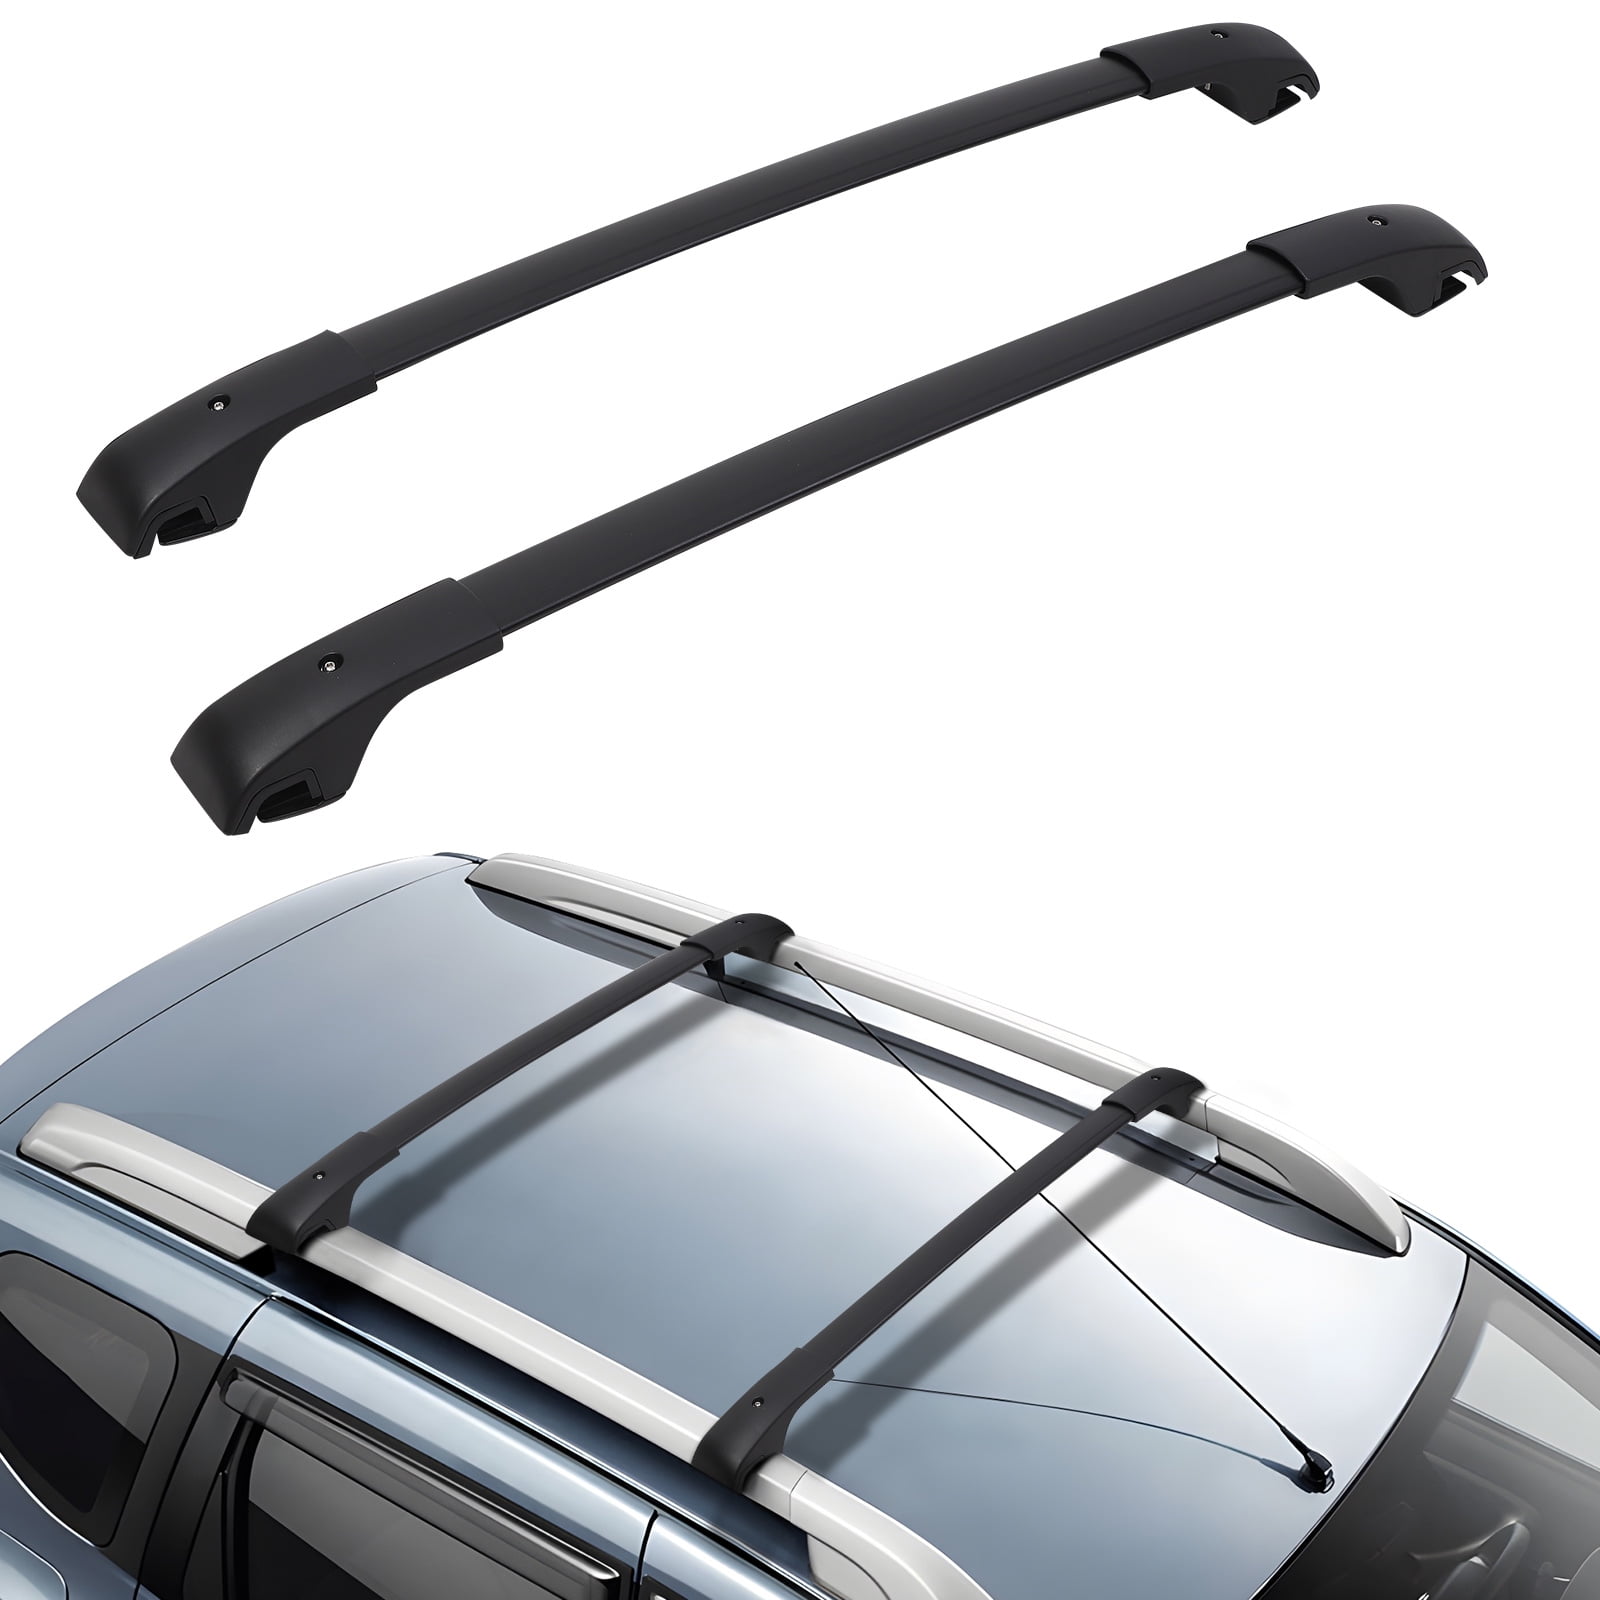 KTENME Car Roof Rack Cross Bars, Universal Fit Adjustable from 10 to 54  with Grooved Side Rails, Aluminum Cross Bar Replacement for Rooftop Cargo  Carrier Bag Kayak Bike Snowboard 